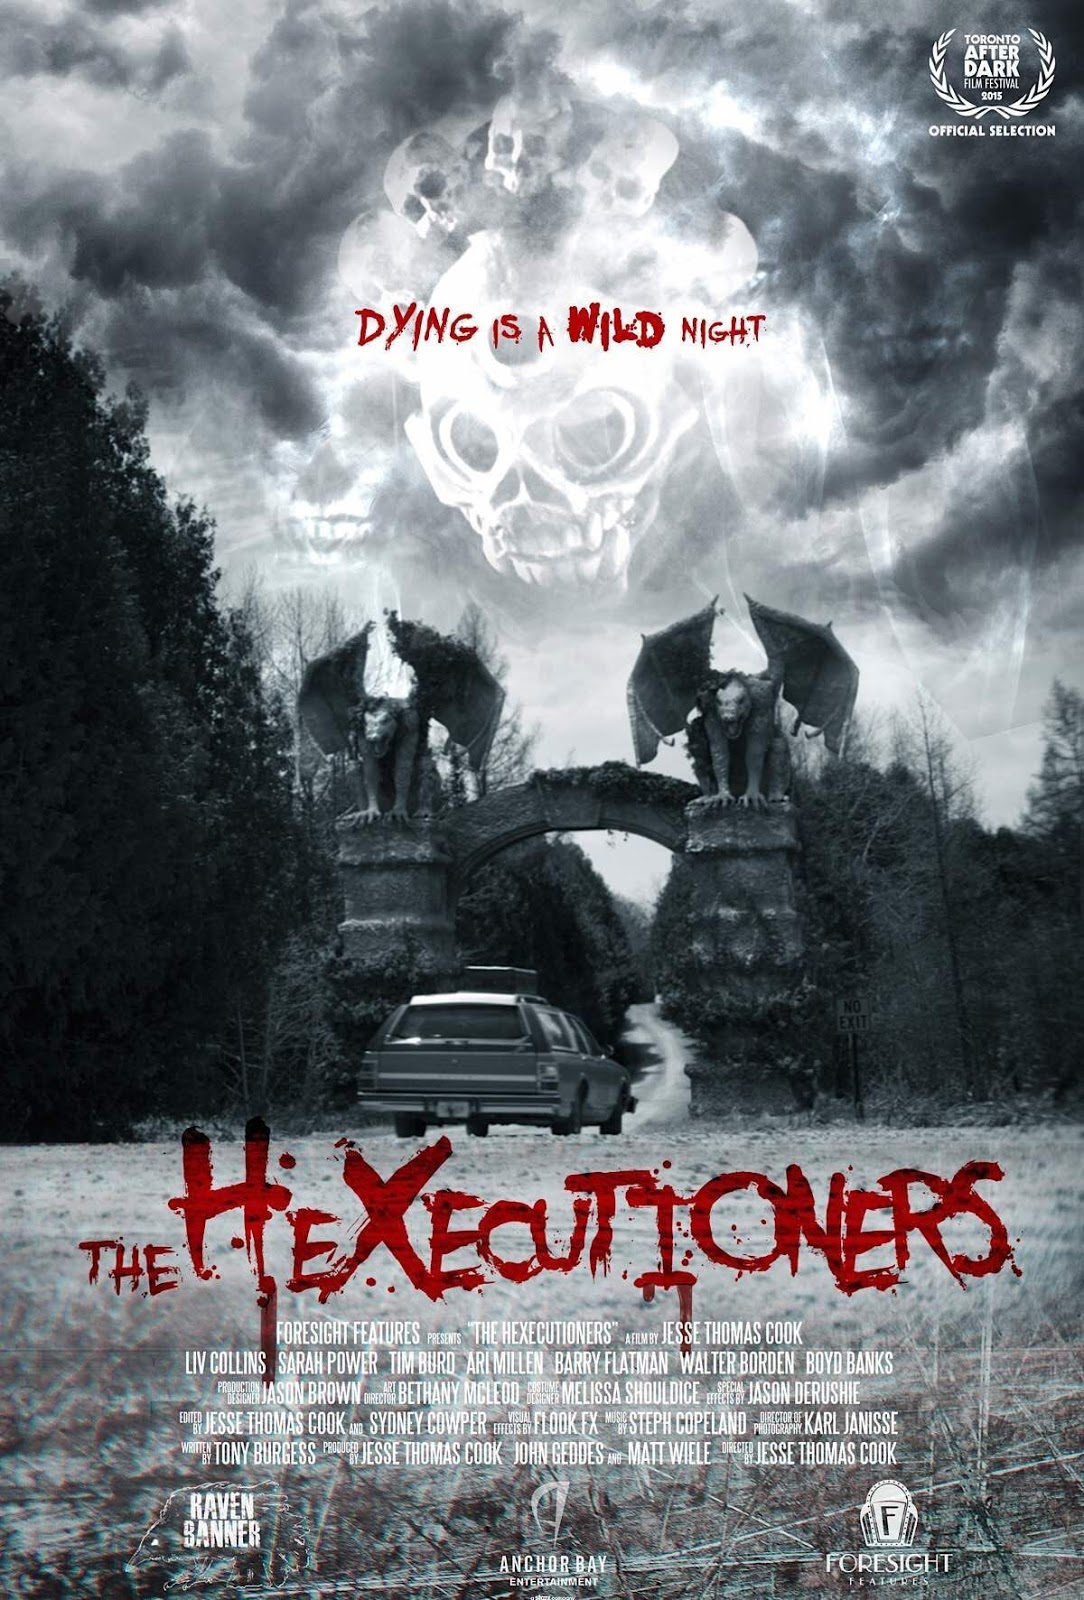 The Hexecutioners 2015 - Full (HD)